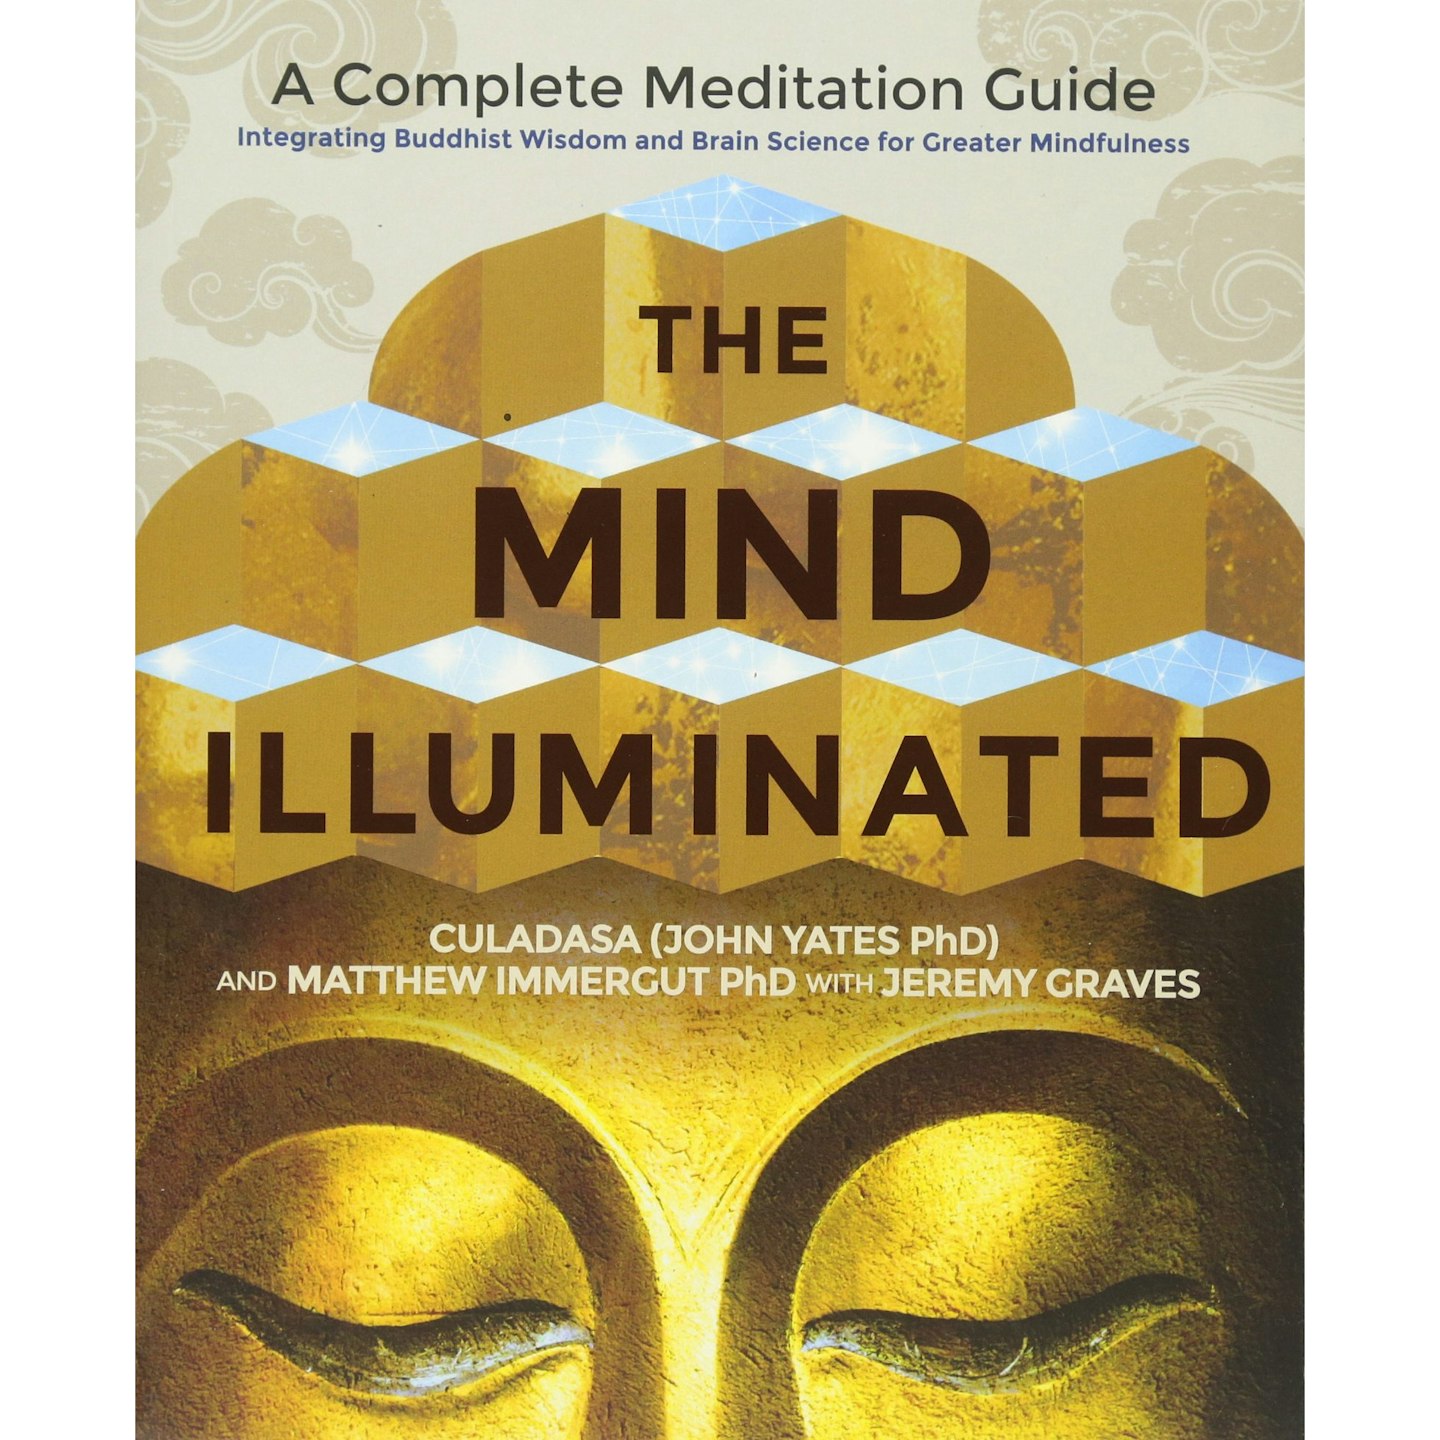 The Mind Illuminated: A Complete Meditation Guide by John Yates PHD